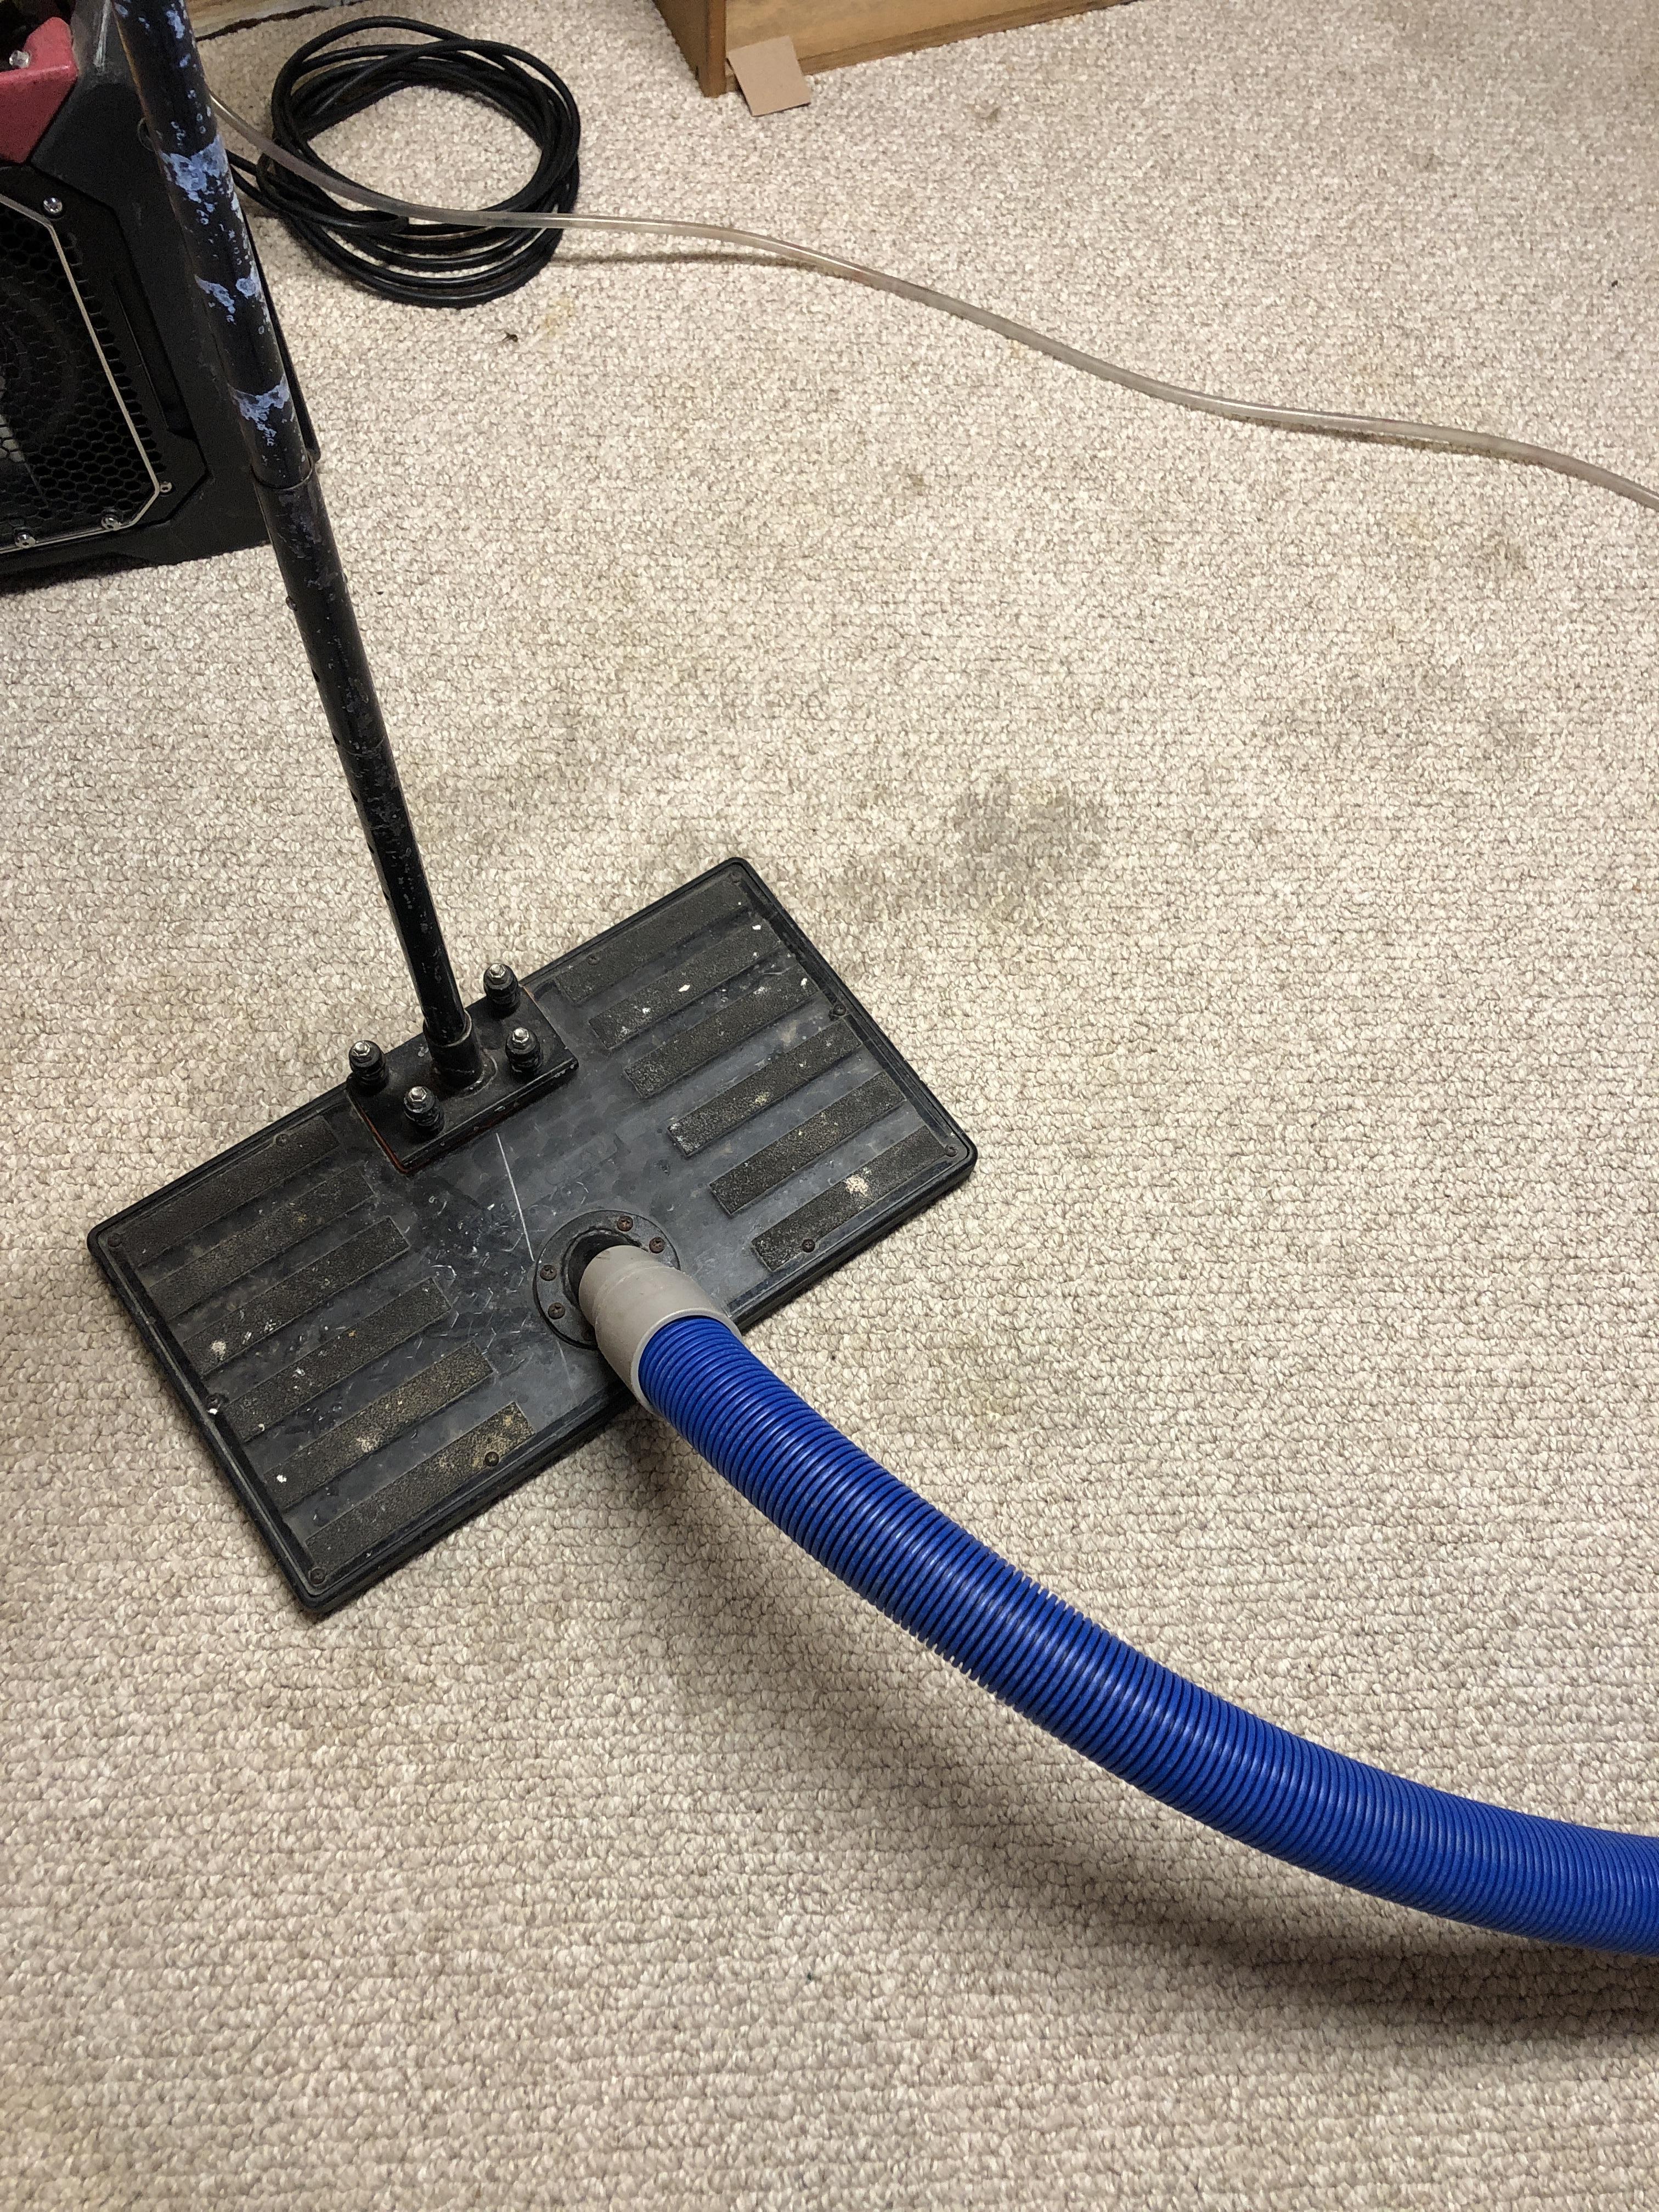 Extracting water from the carpet